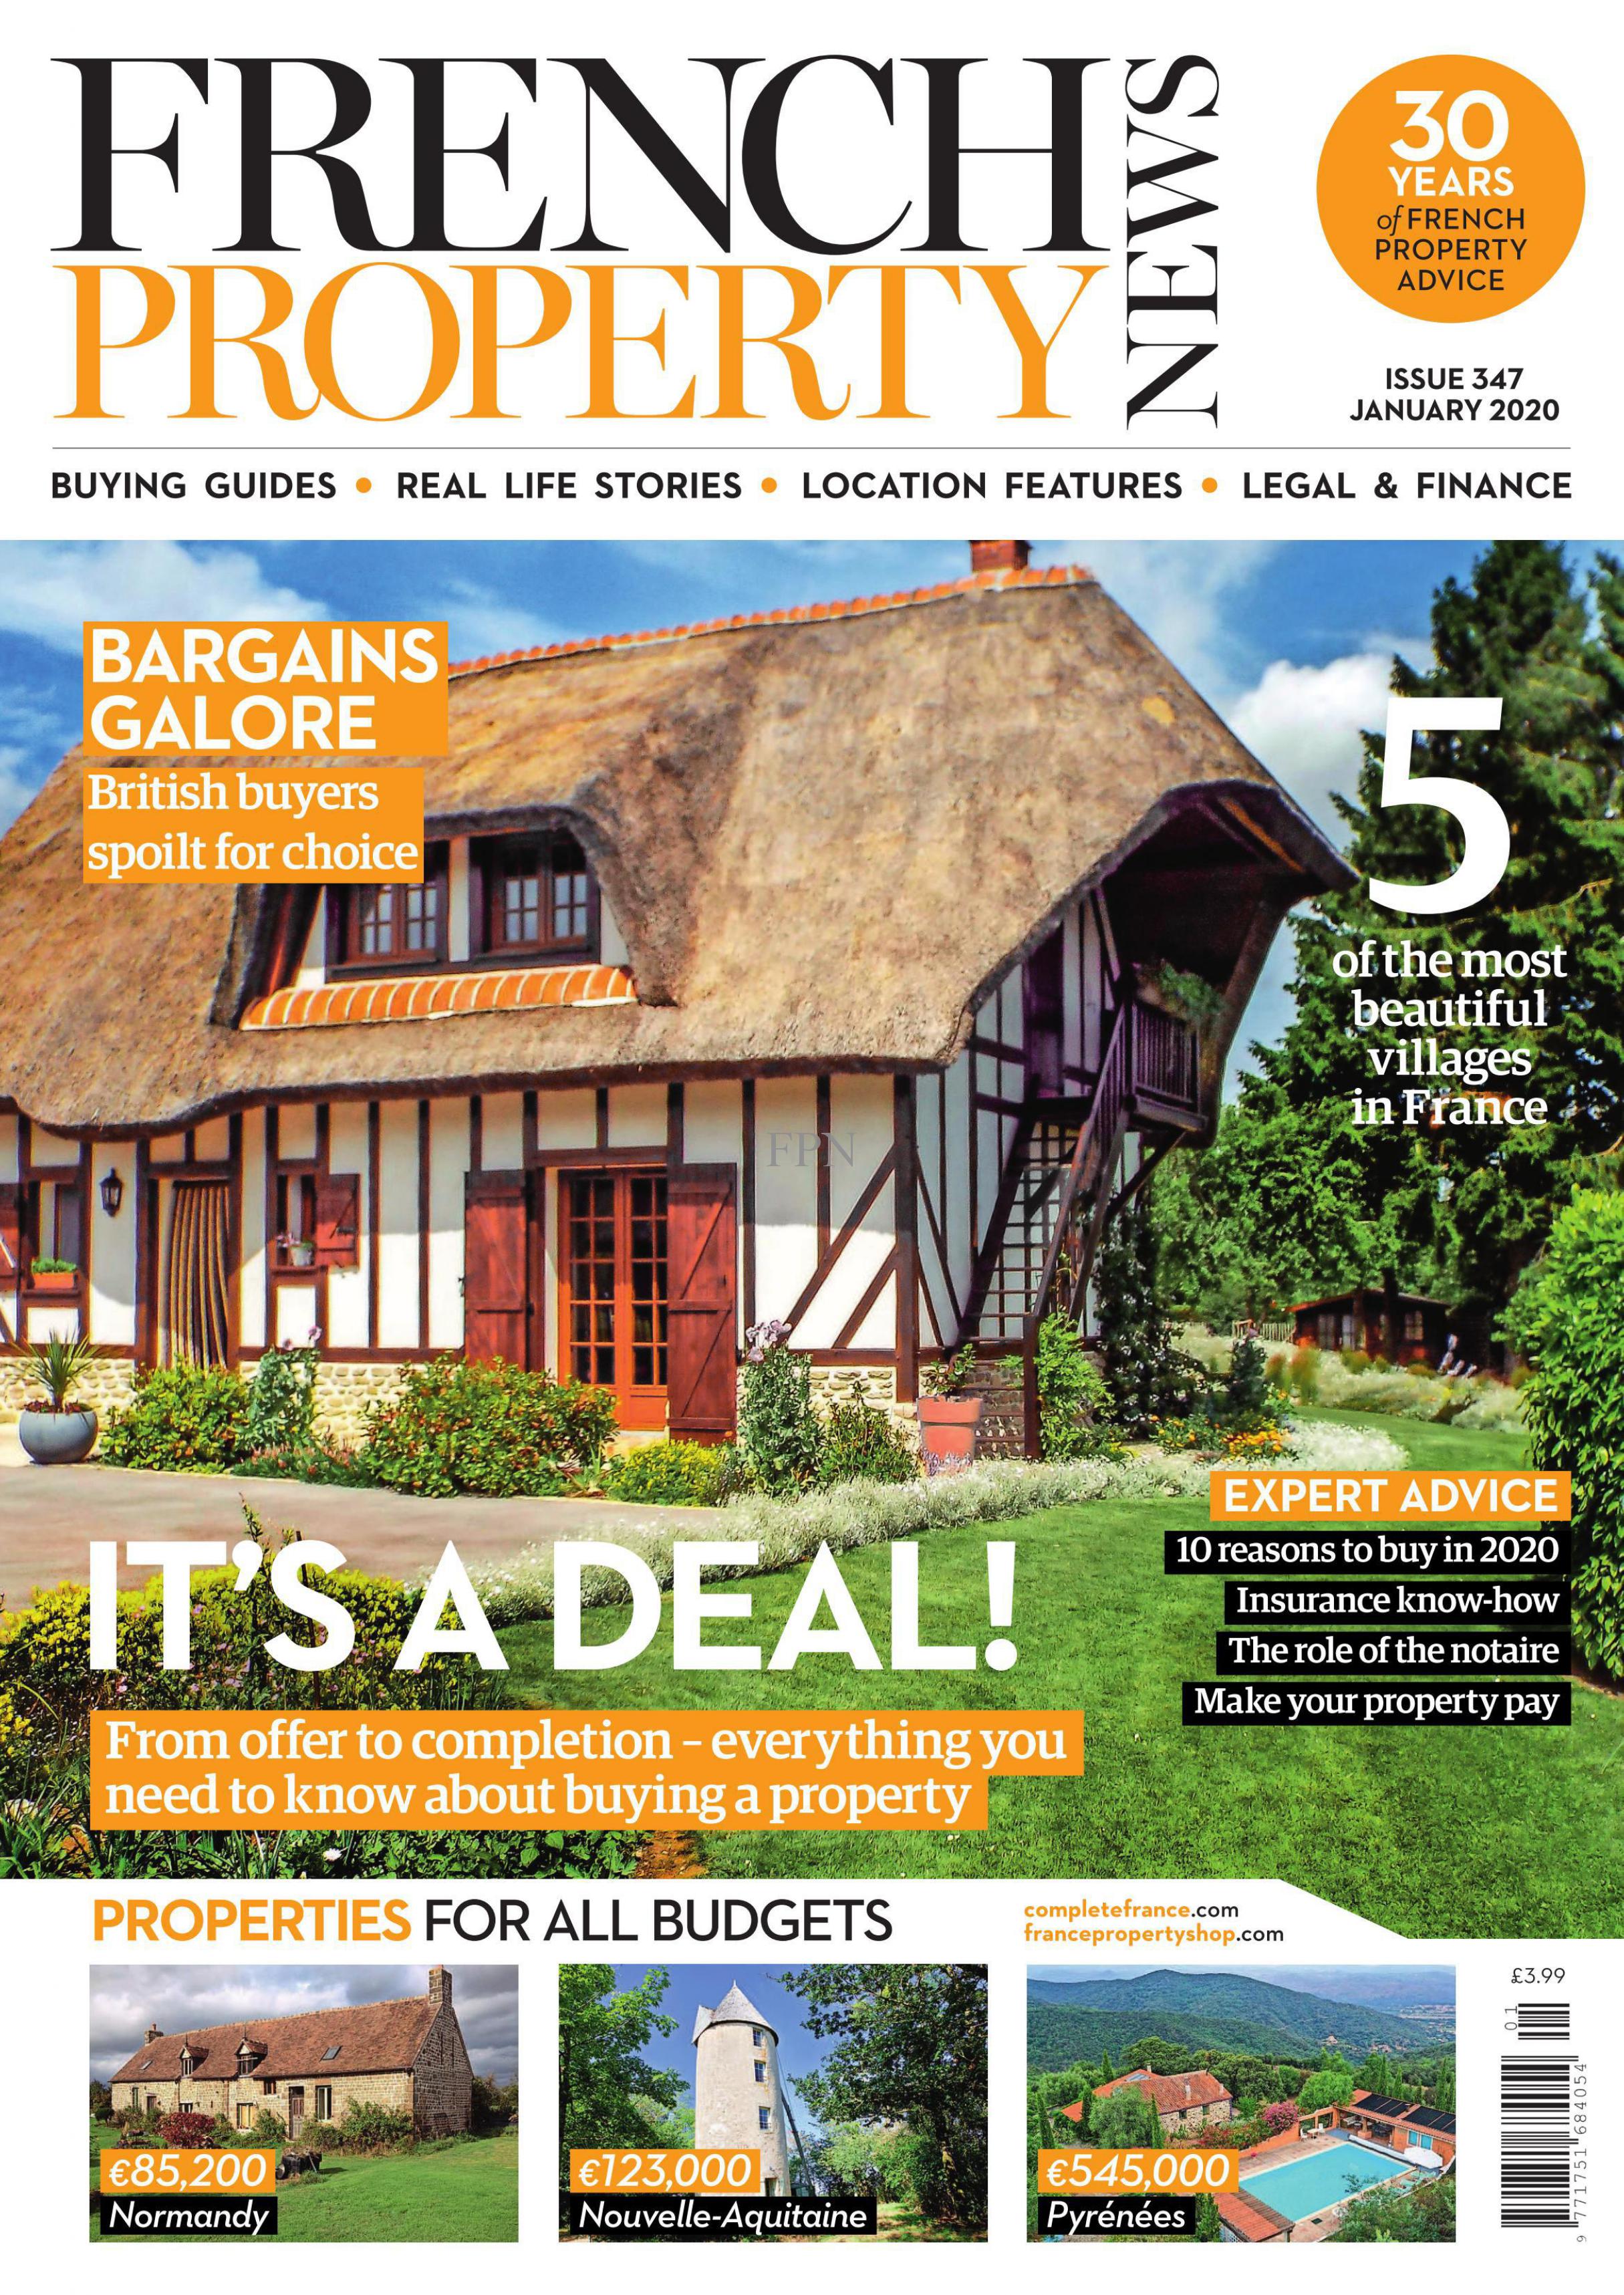 French Property News Jan 20 front cover